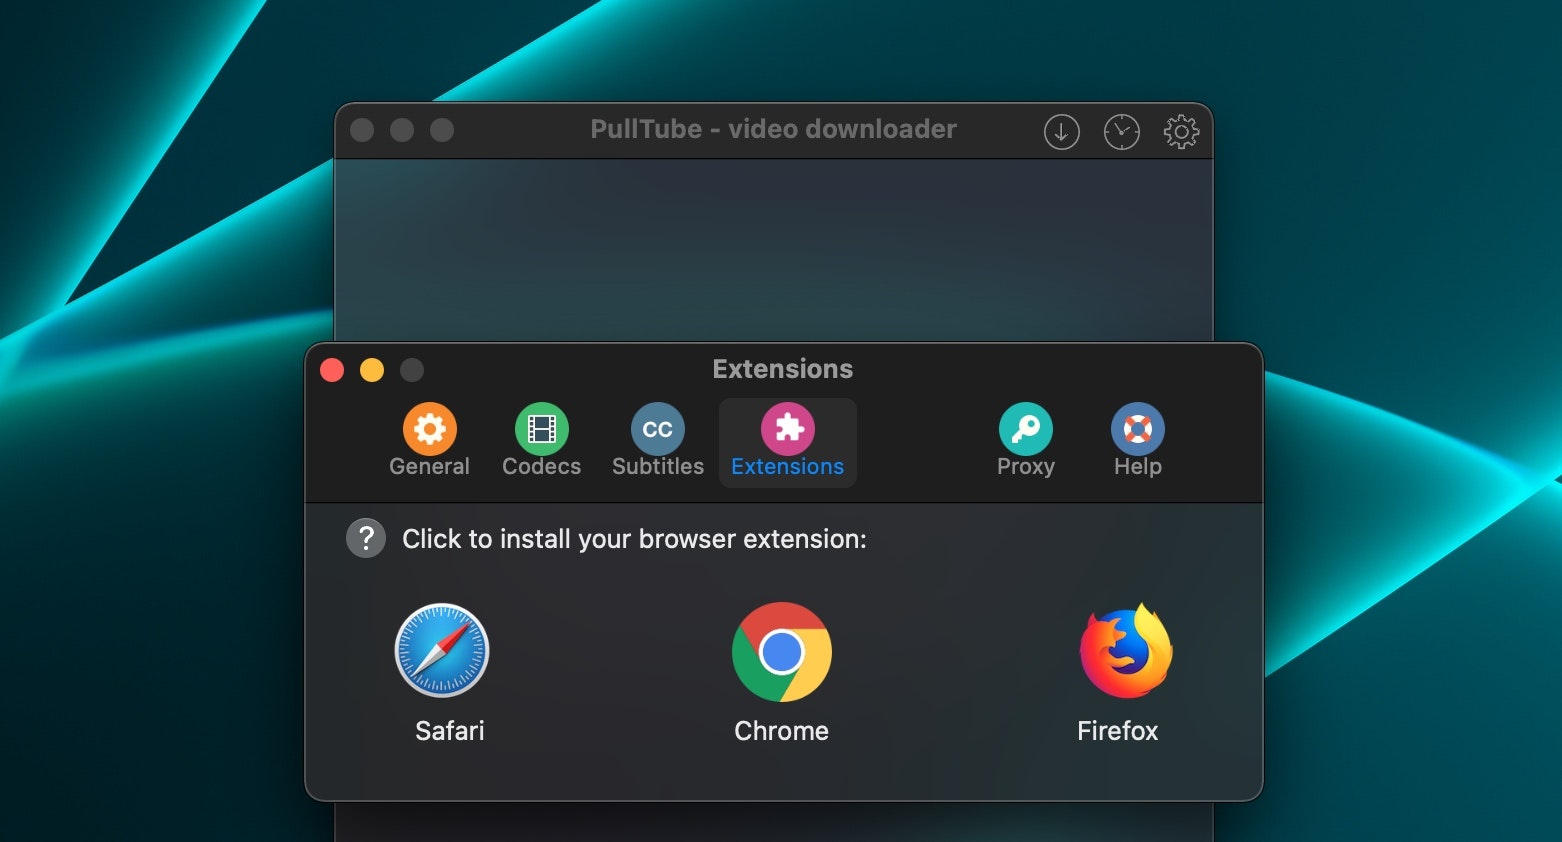 Pulltube browser extension